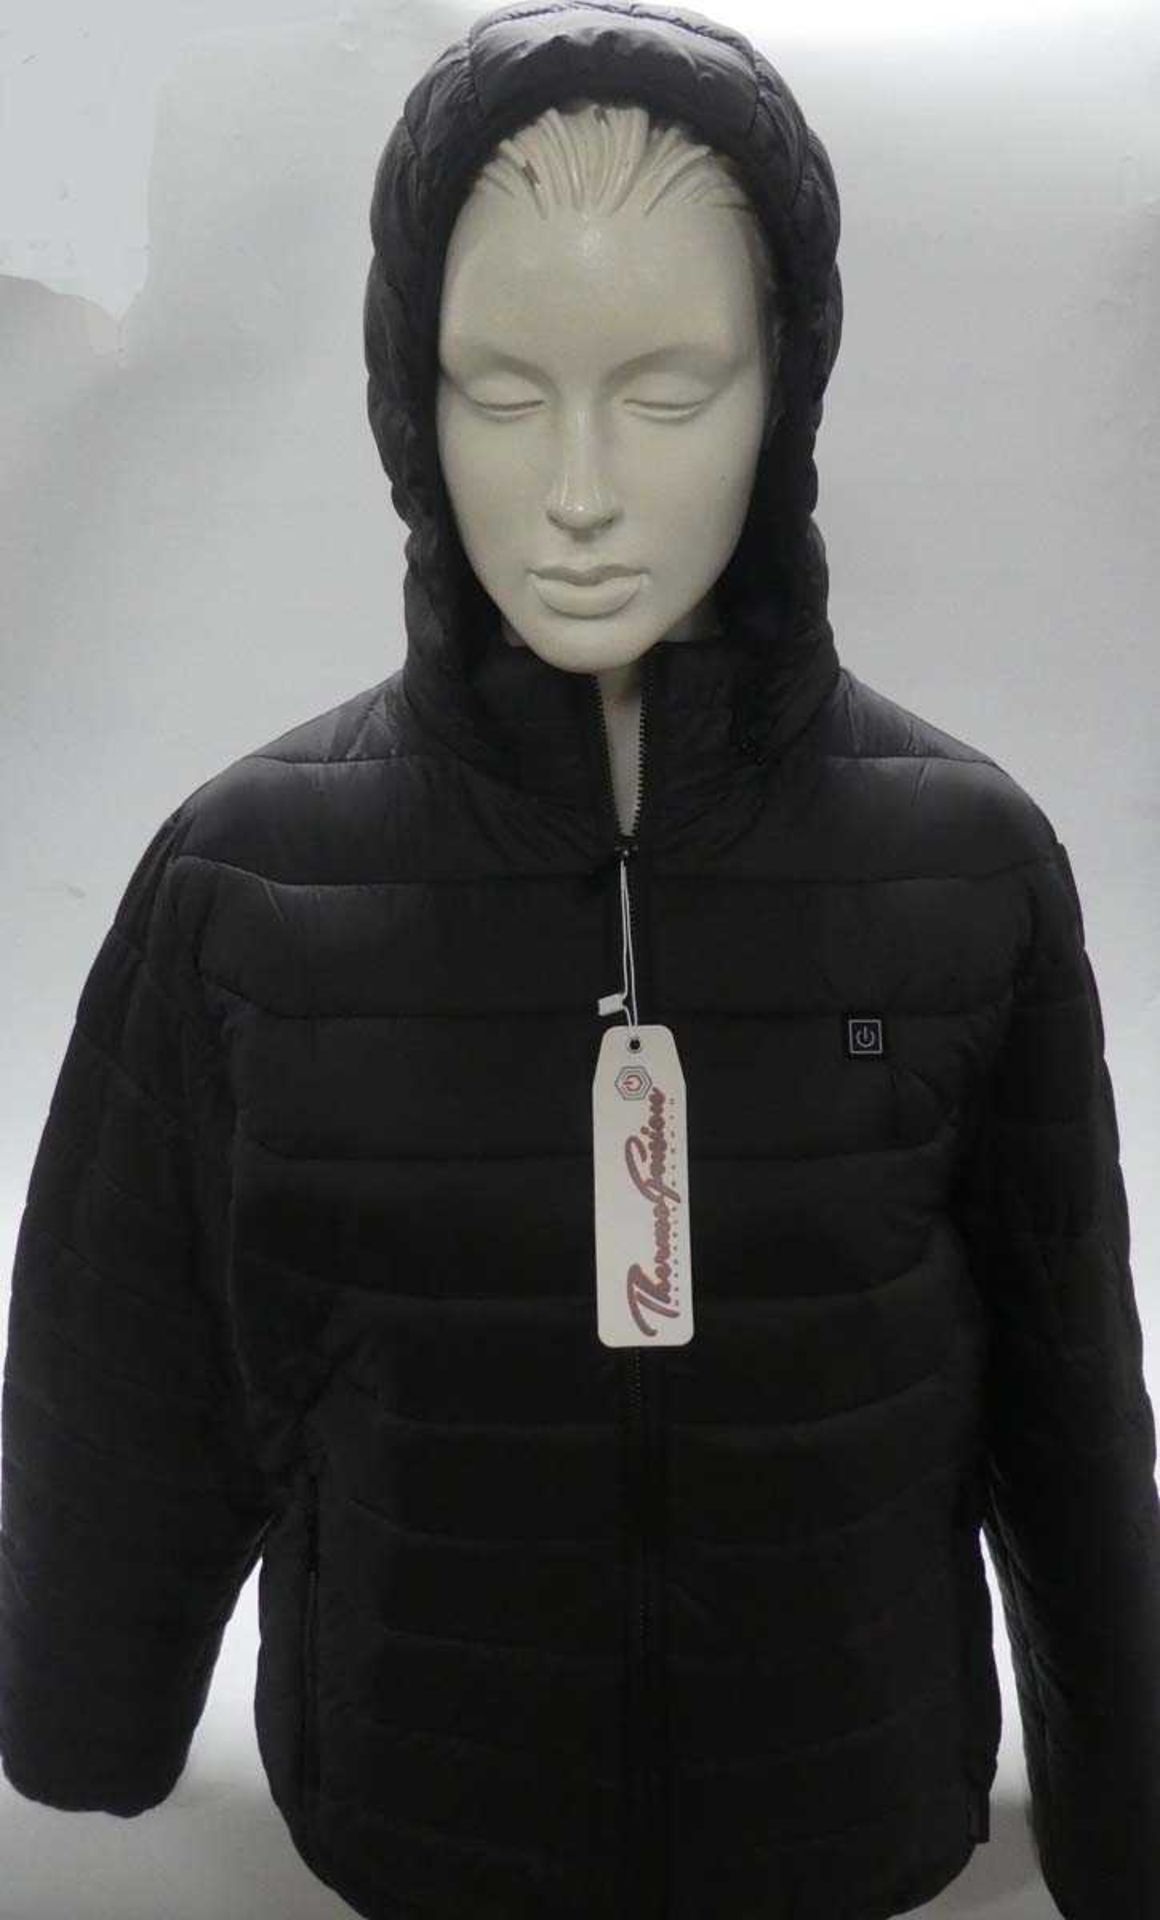 +VAT Thermofusion heated jacket with 5000mAh battery pack size XL